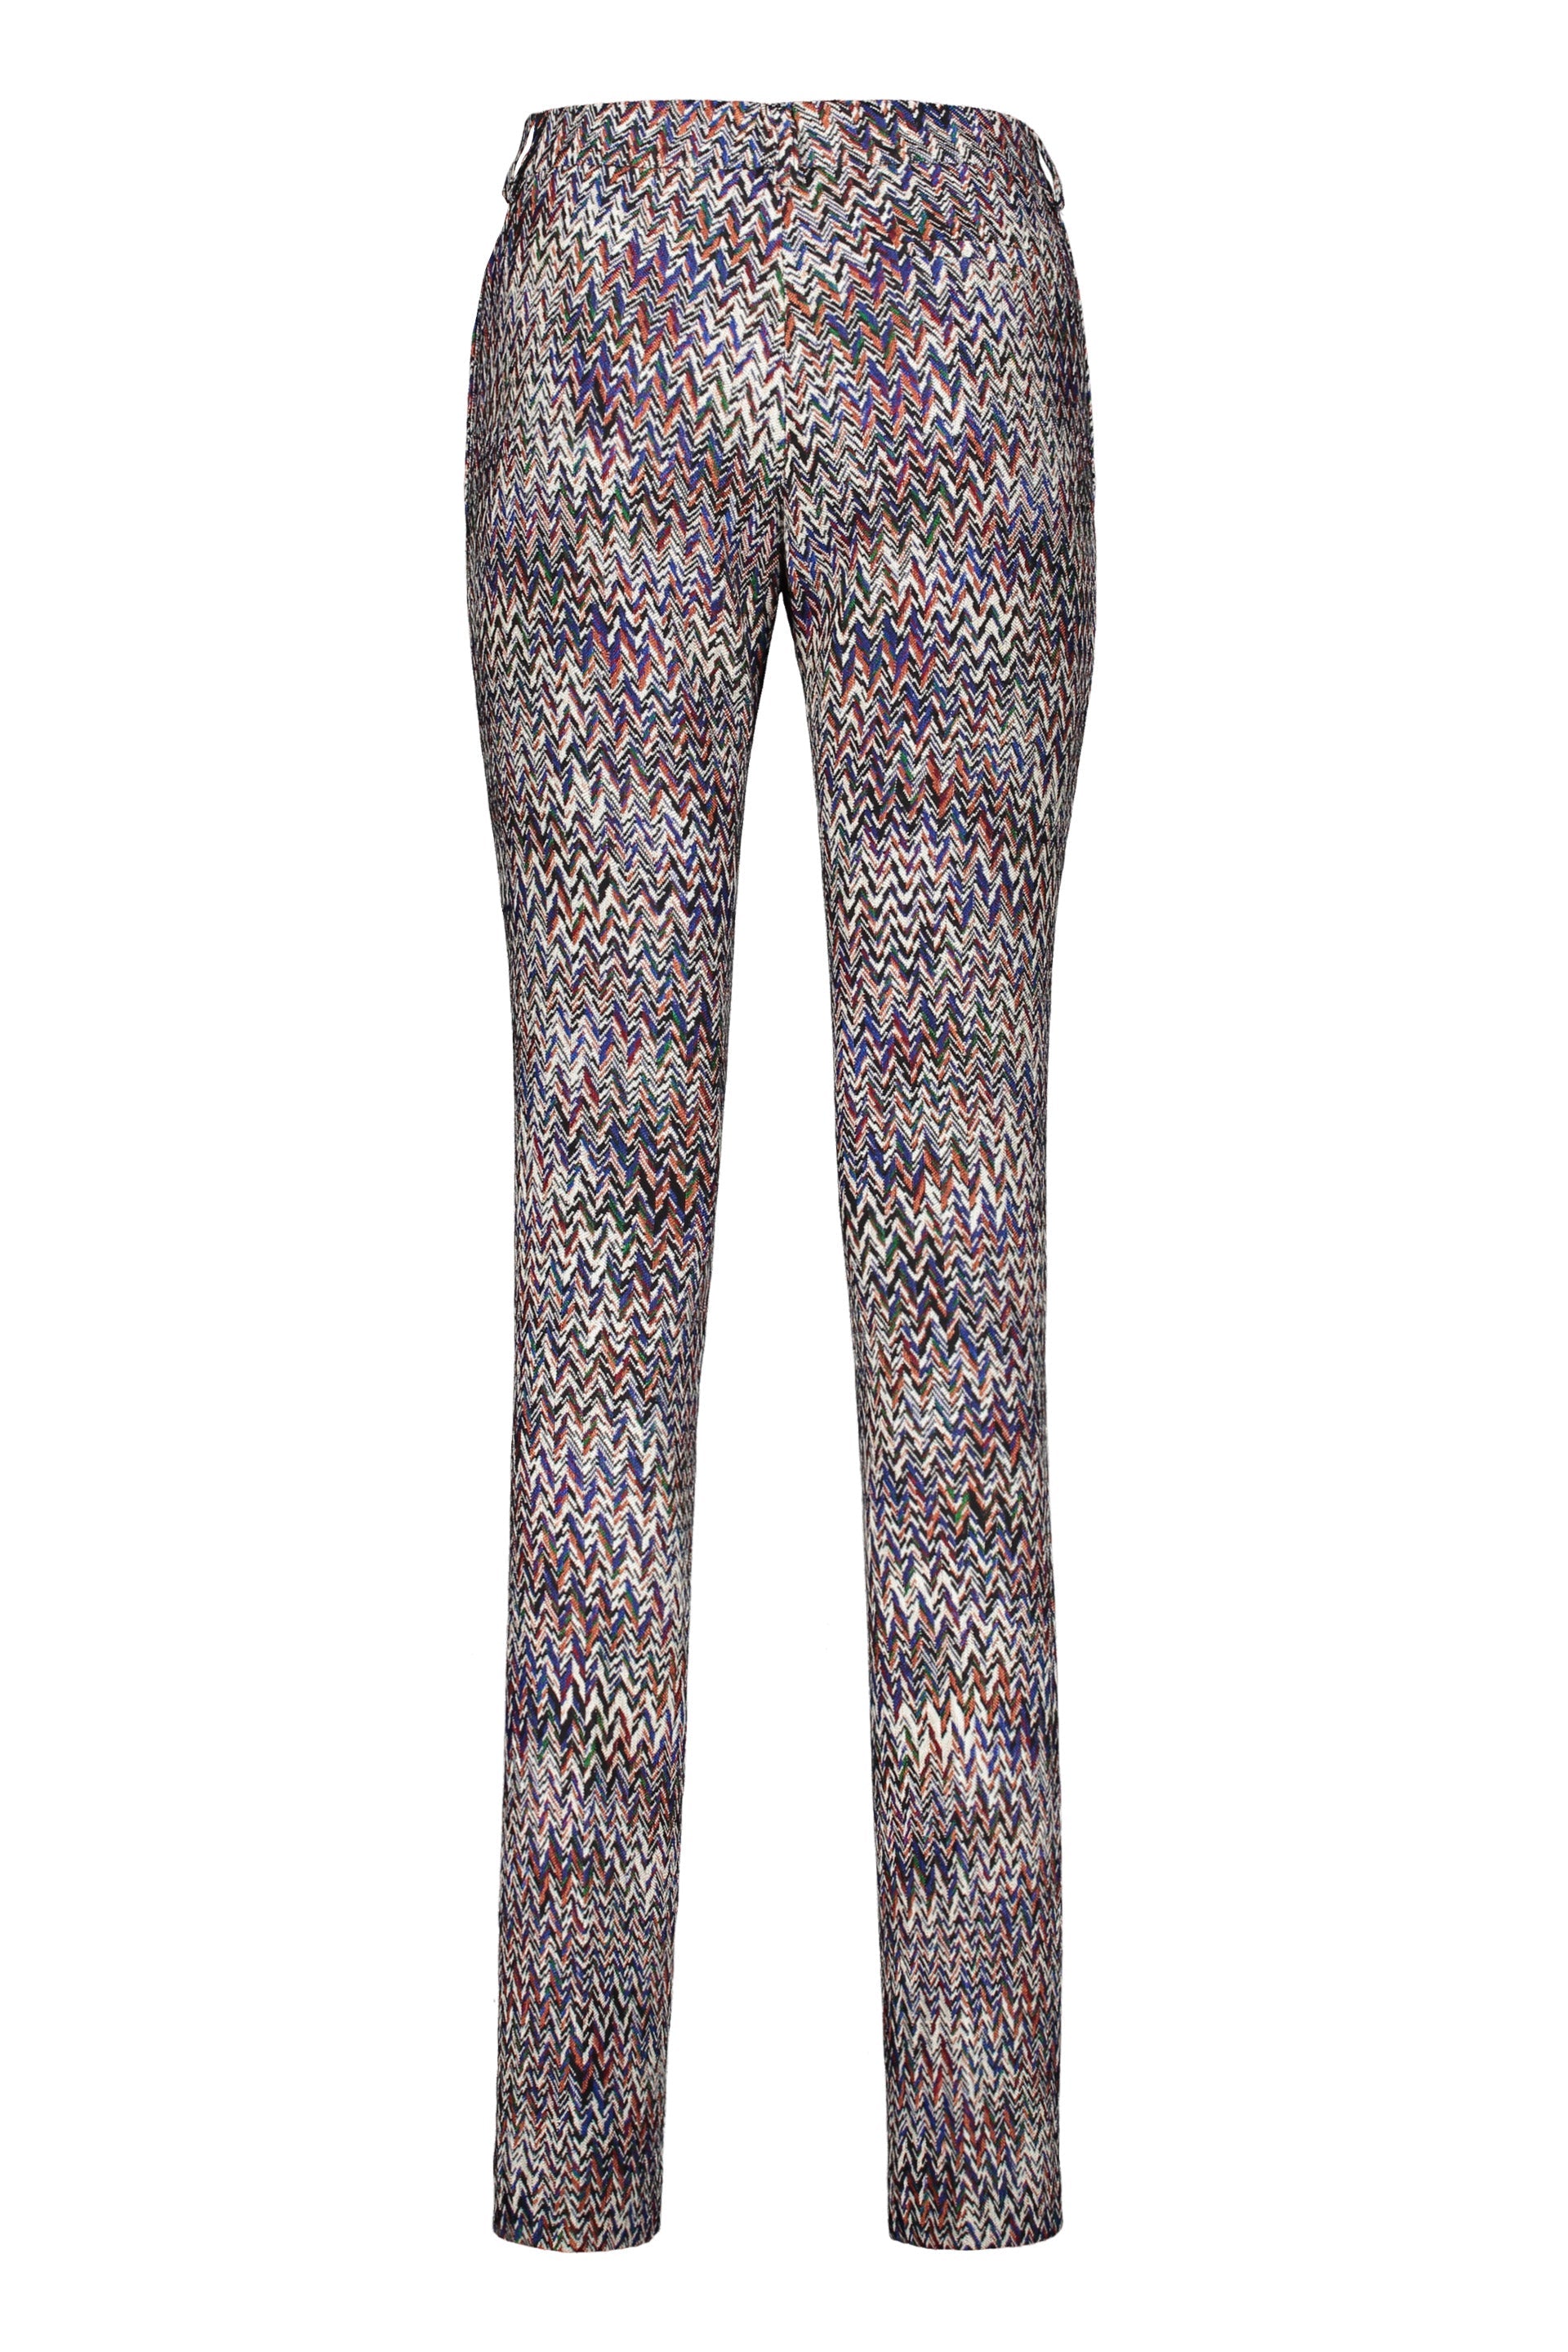 Missoni-OUTLET-SALE-Chevron-knitted-palazzo-trousers-Hosen-ARCHIVE-COLLECTION-2_d6c3fe57-40c1-4e39-ac2d-7531e20644ee.jpg